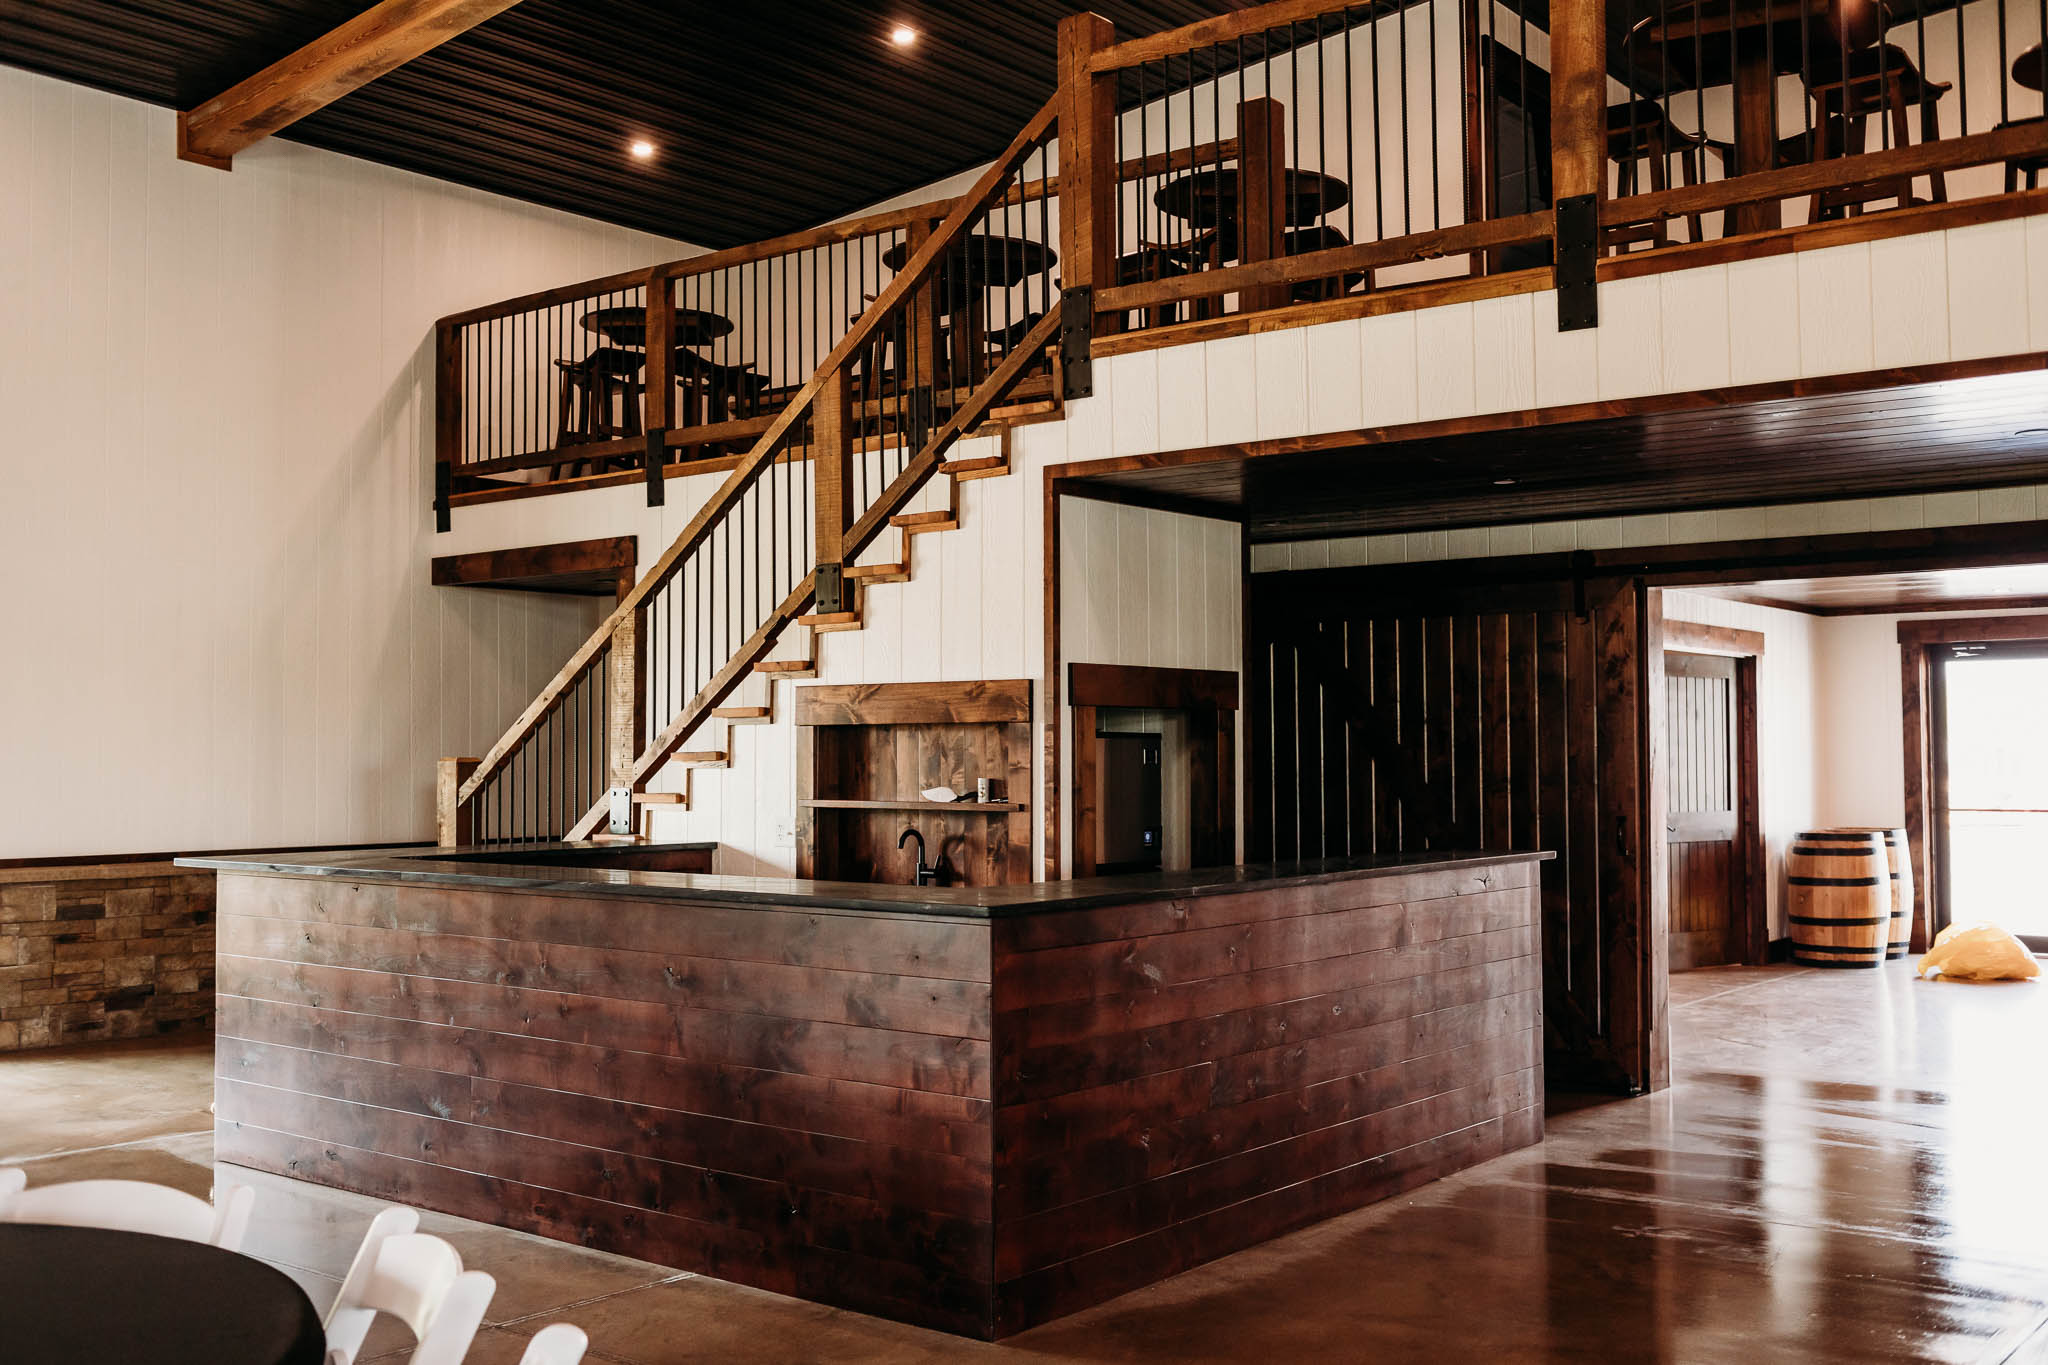 A wide view of the drink serving bar and stairs to the upper loft seating area. The bar is made of dark walnut wood and the handrails of the stairs are reclaimed oak wood.